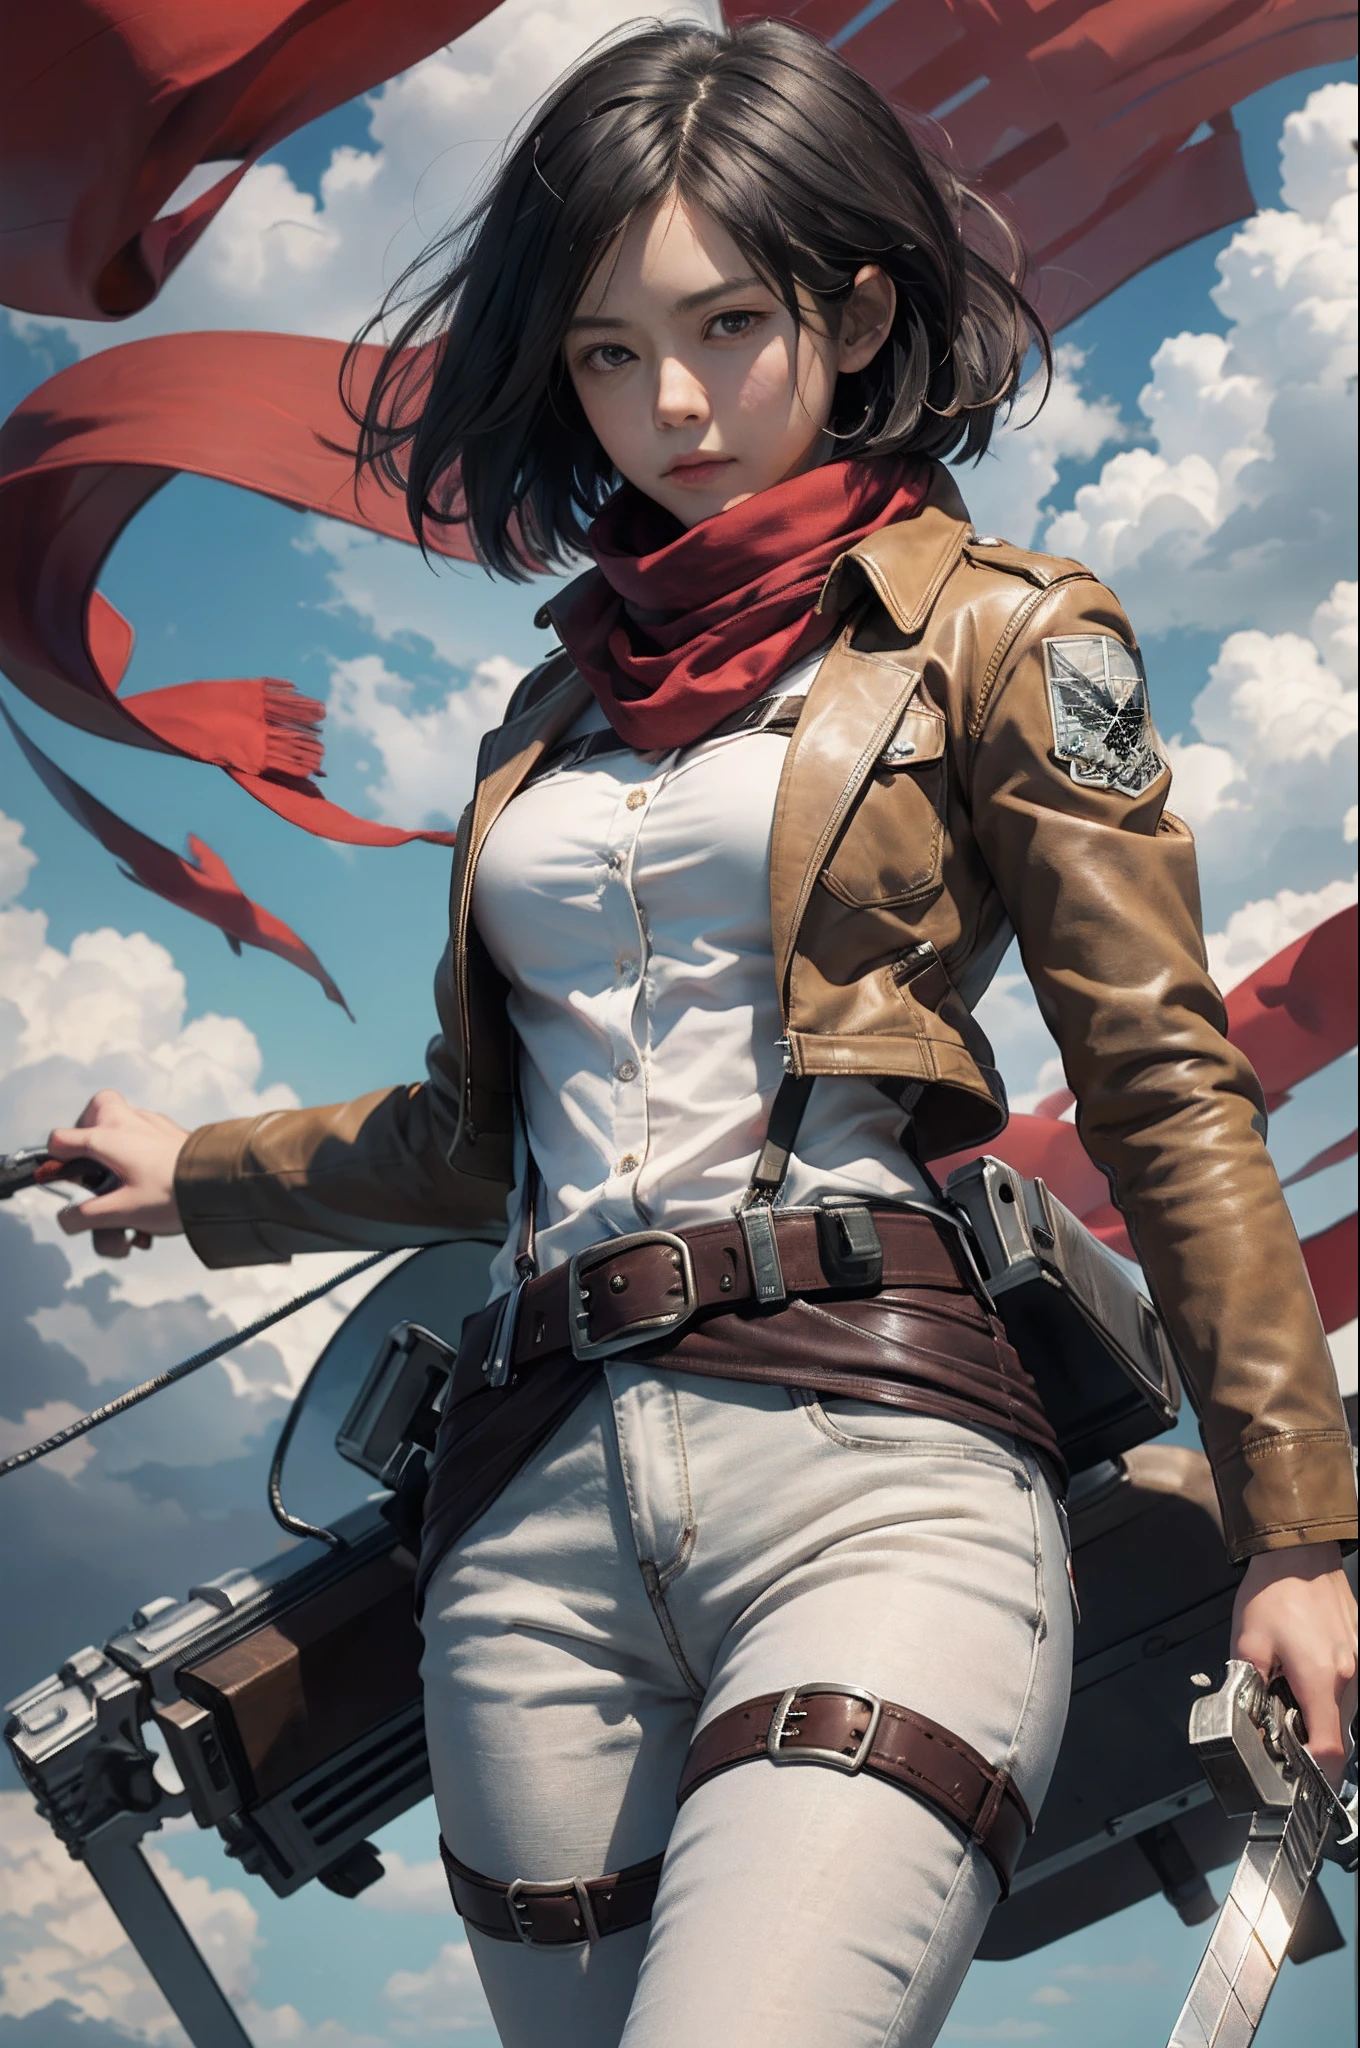 Mikasa, Masterpiece, Best quality, A high resolution, Short hair, Black eyes, Scarf, emblem, belt, thigh band, Red scarf, White pants, Brown jacket, Long sleeves, holding weapon, sword, dual wielding, Three-dimensional electric gear, Arms spread wide, standing on one leg, Wide shot, sky, Highest quality, high resolution.